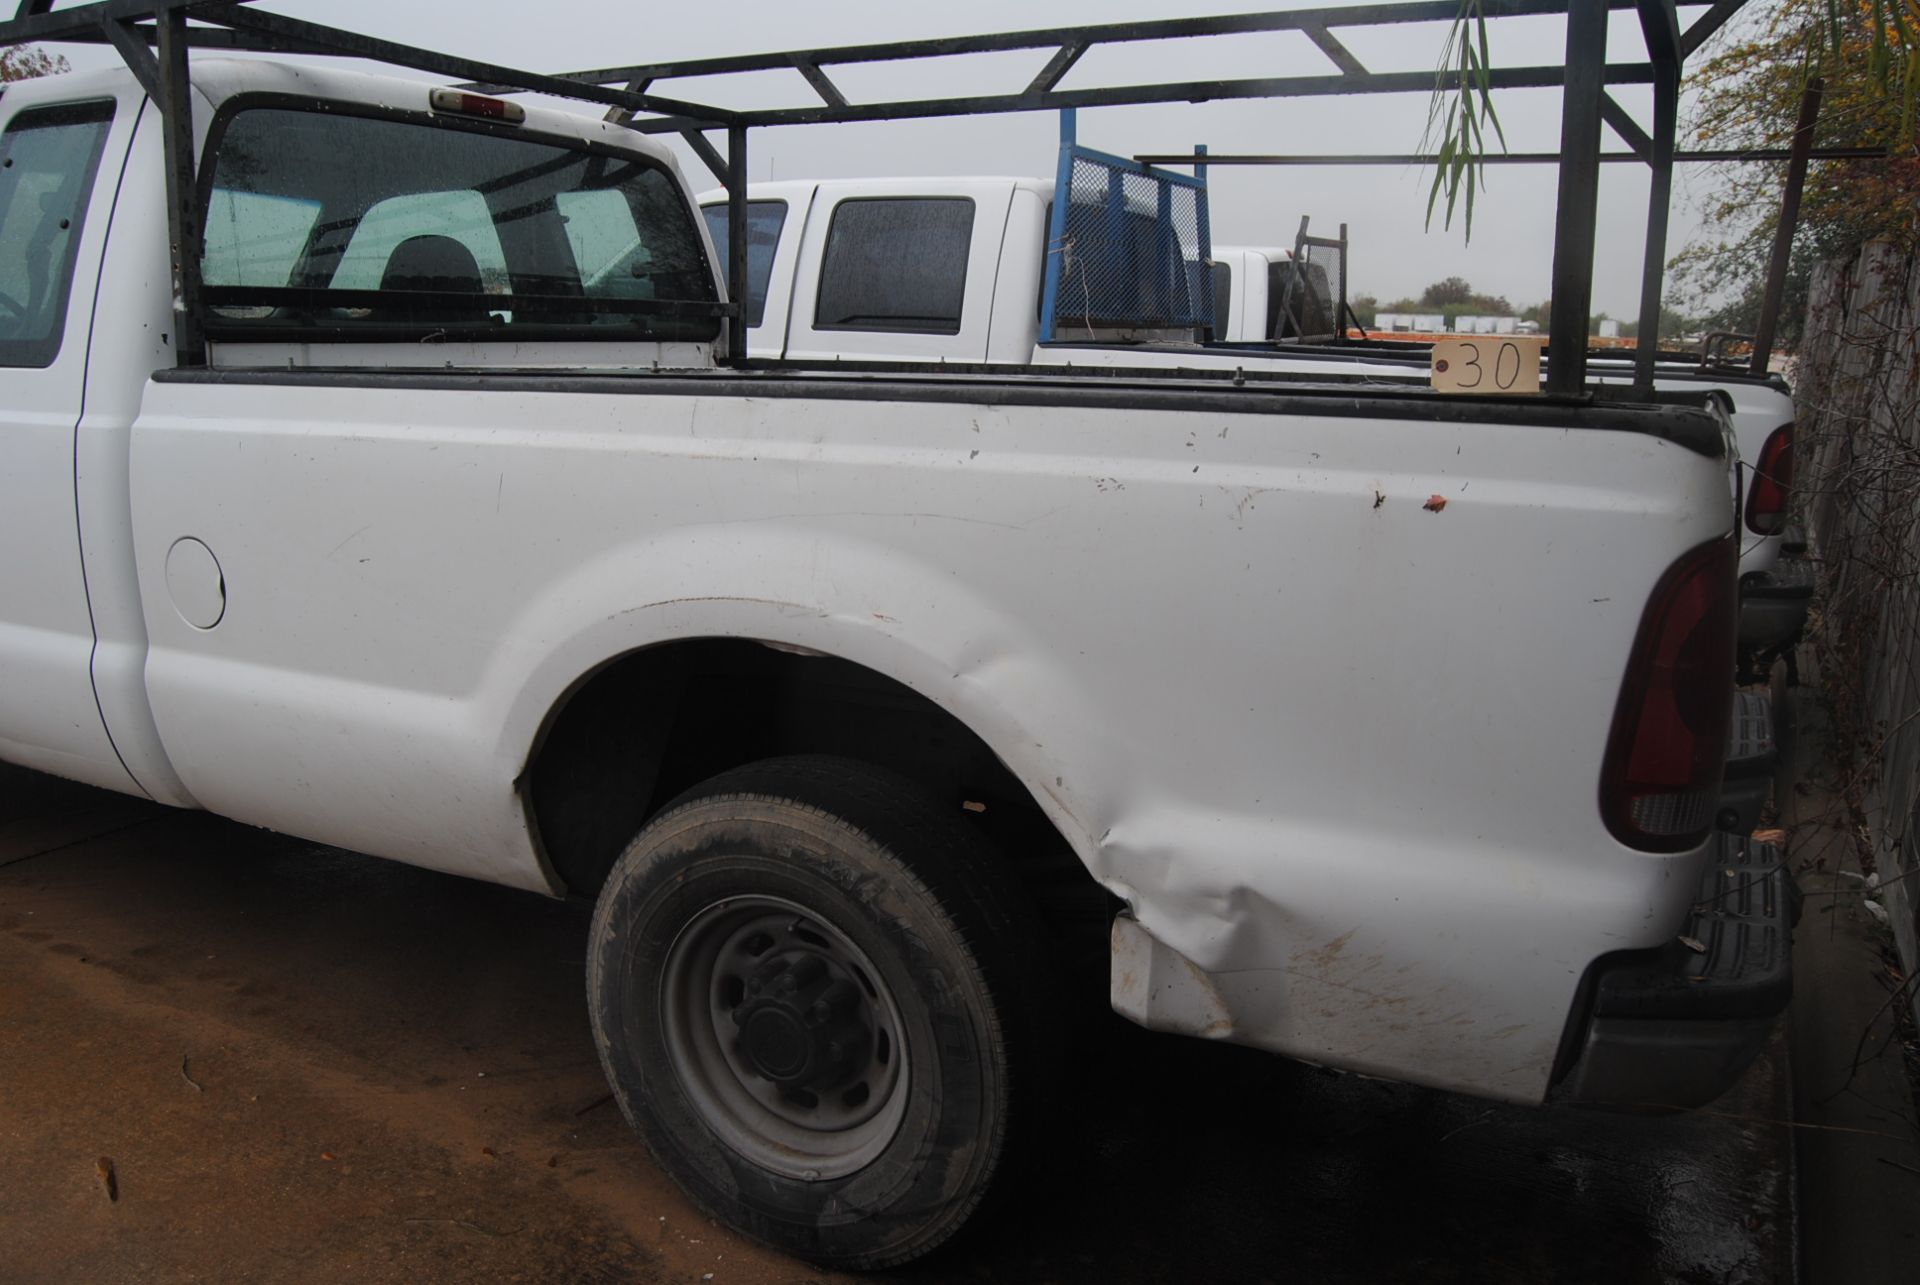 '04 Ford Work Truck F250 Super Duty - Image 5 of 11